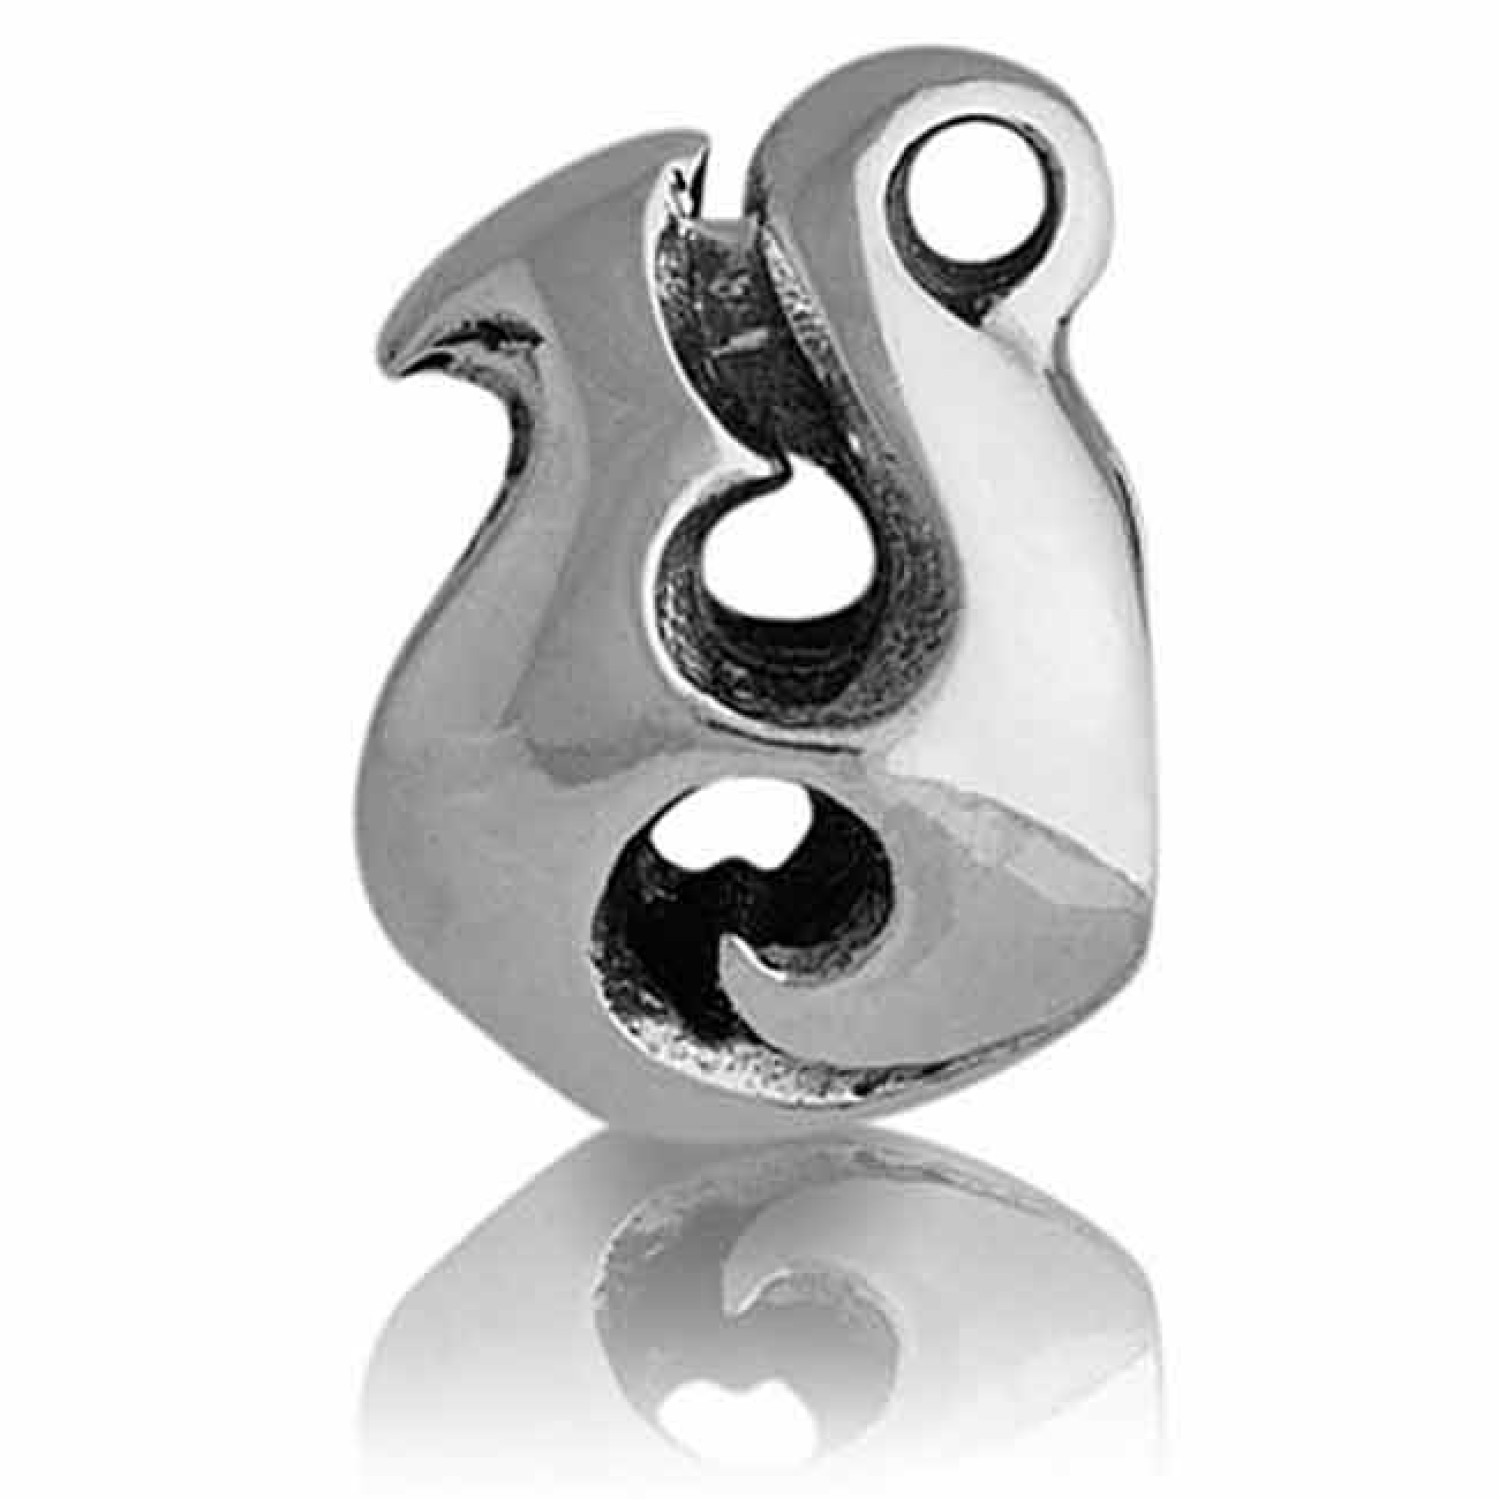 LK003 Evolve Charm Prosperity. Evolve New Zealand LK003 Evolve Charm Prosperity. Our Places, Our memories  This stylised fish hook brings prosperity, good luck and fortune to the wearer. Fish were traditionally so plentiful and important to the M @christi